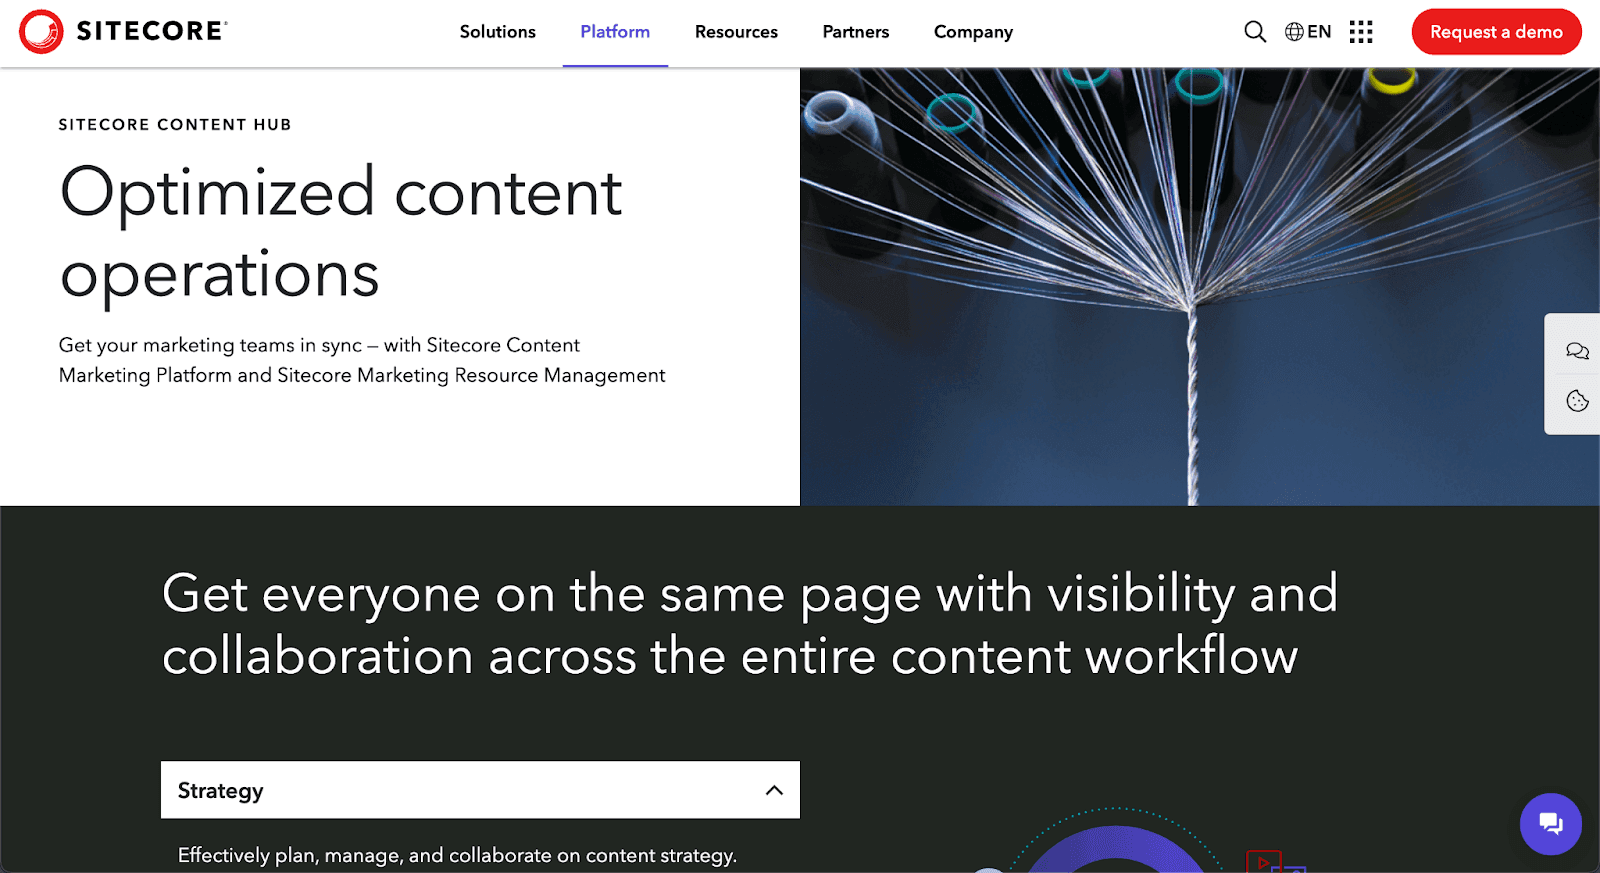 Sitecore Content Hub is a central location or all marketing team work